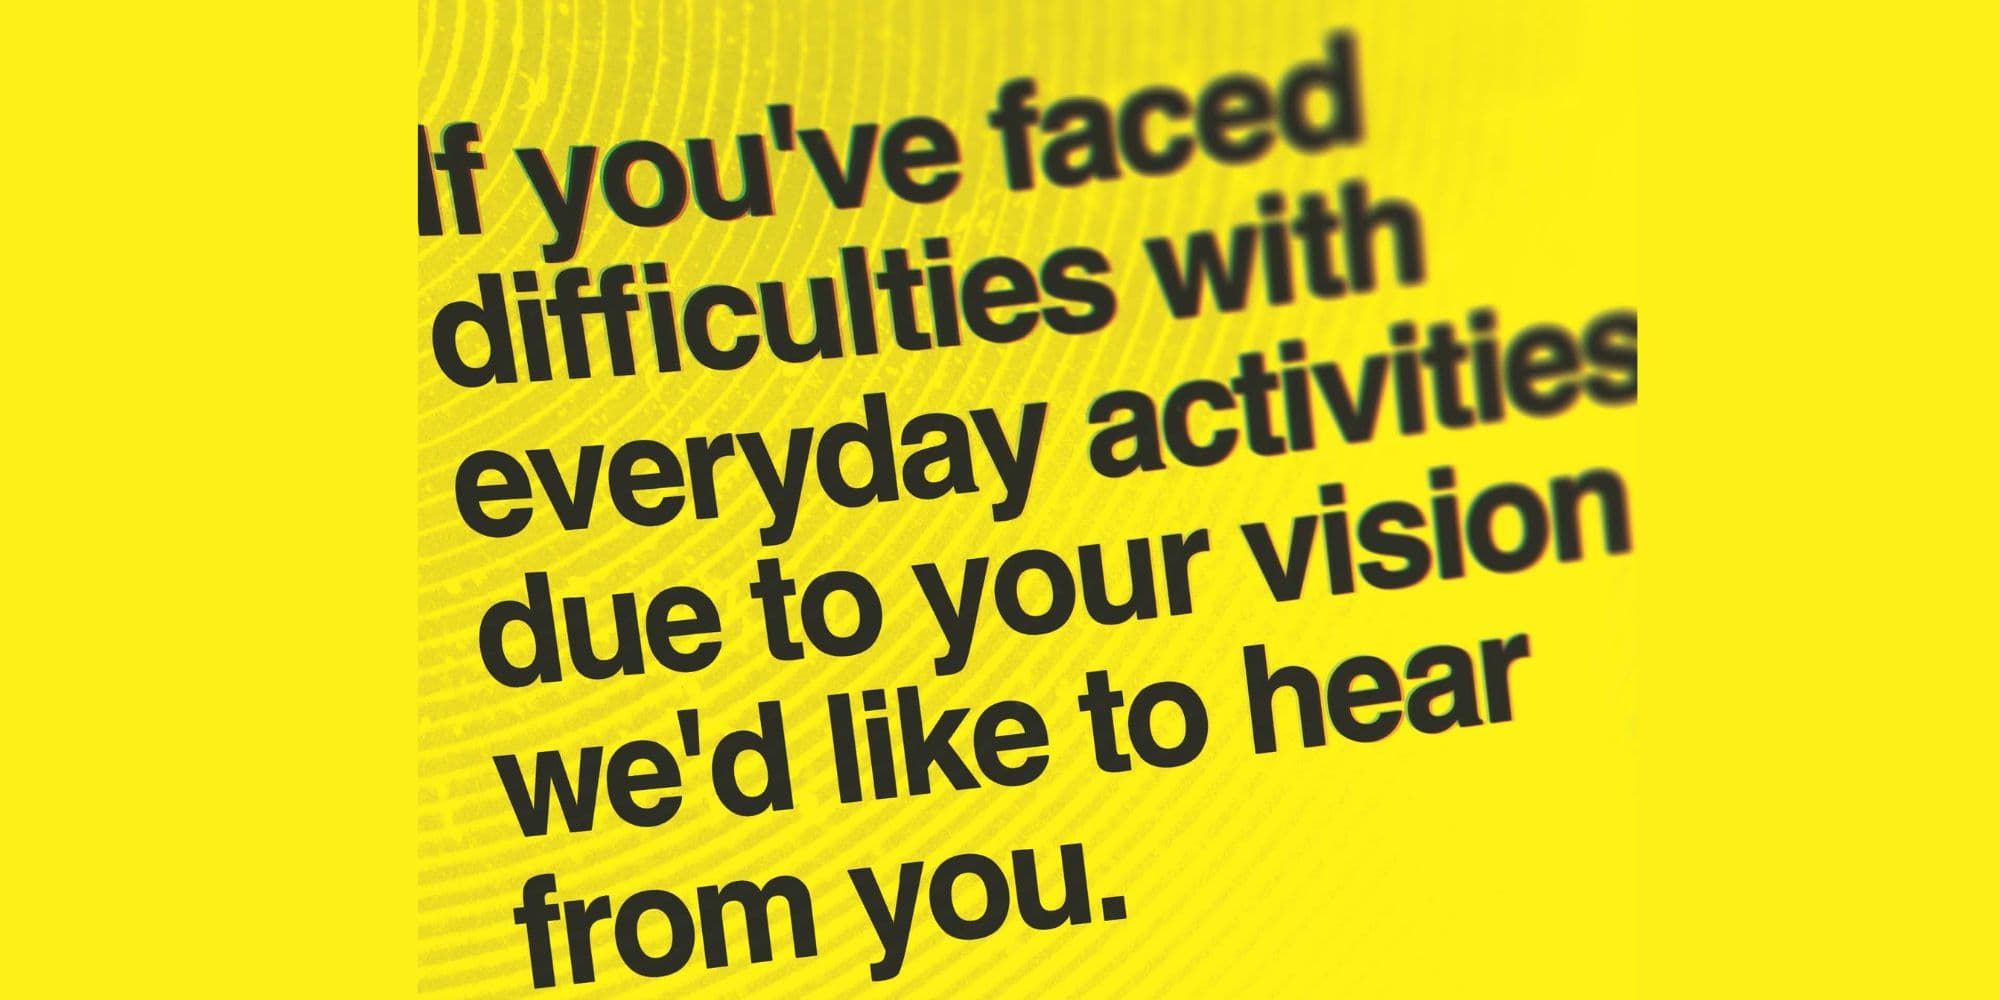 Black text on yellow background: If you've faced difficulties with everyday activities due to your vision, we'd like to hear from you.